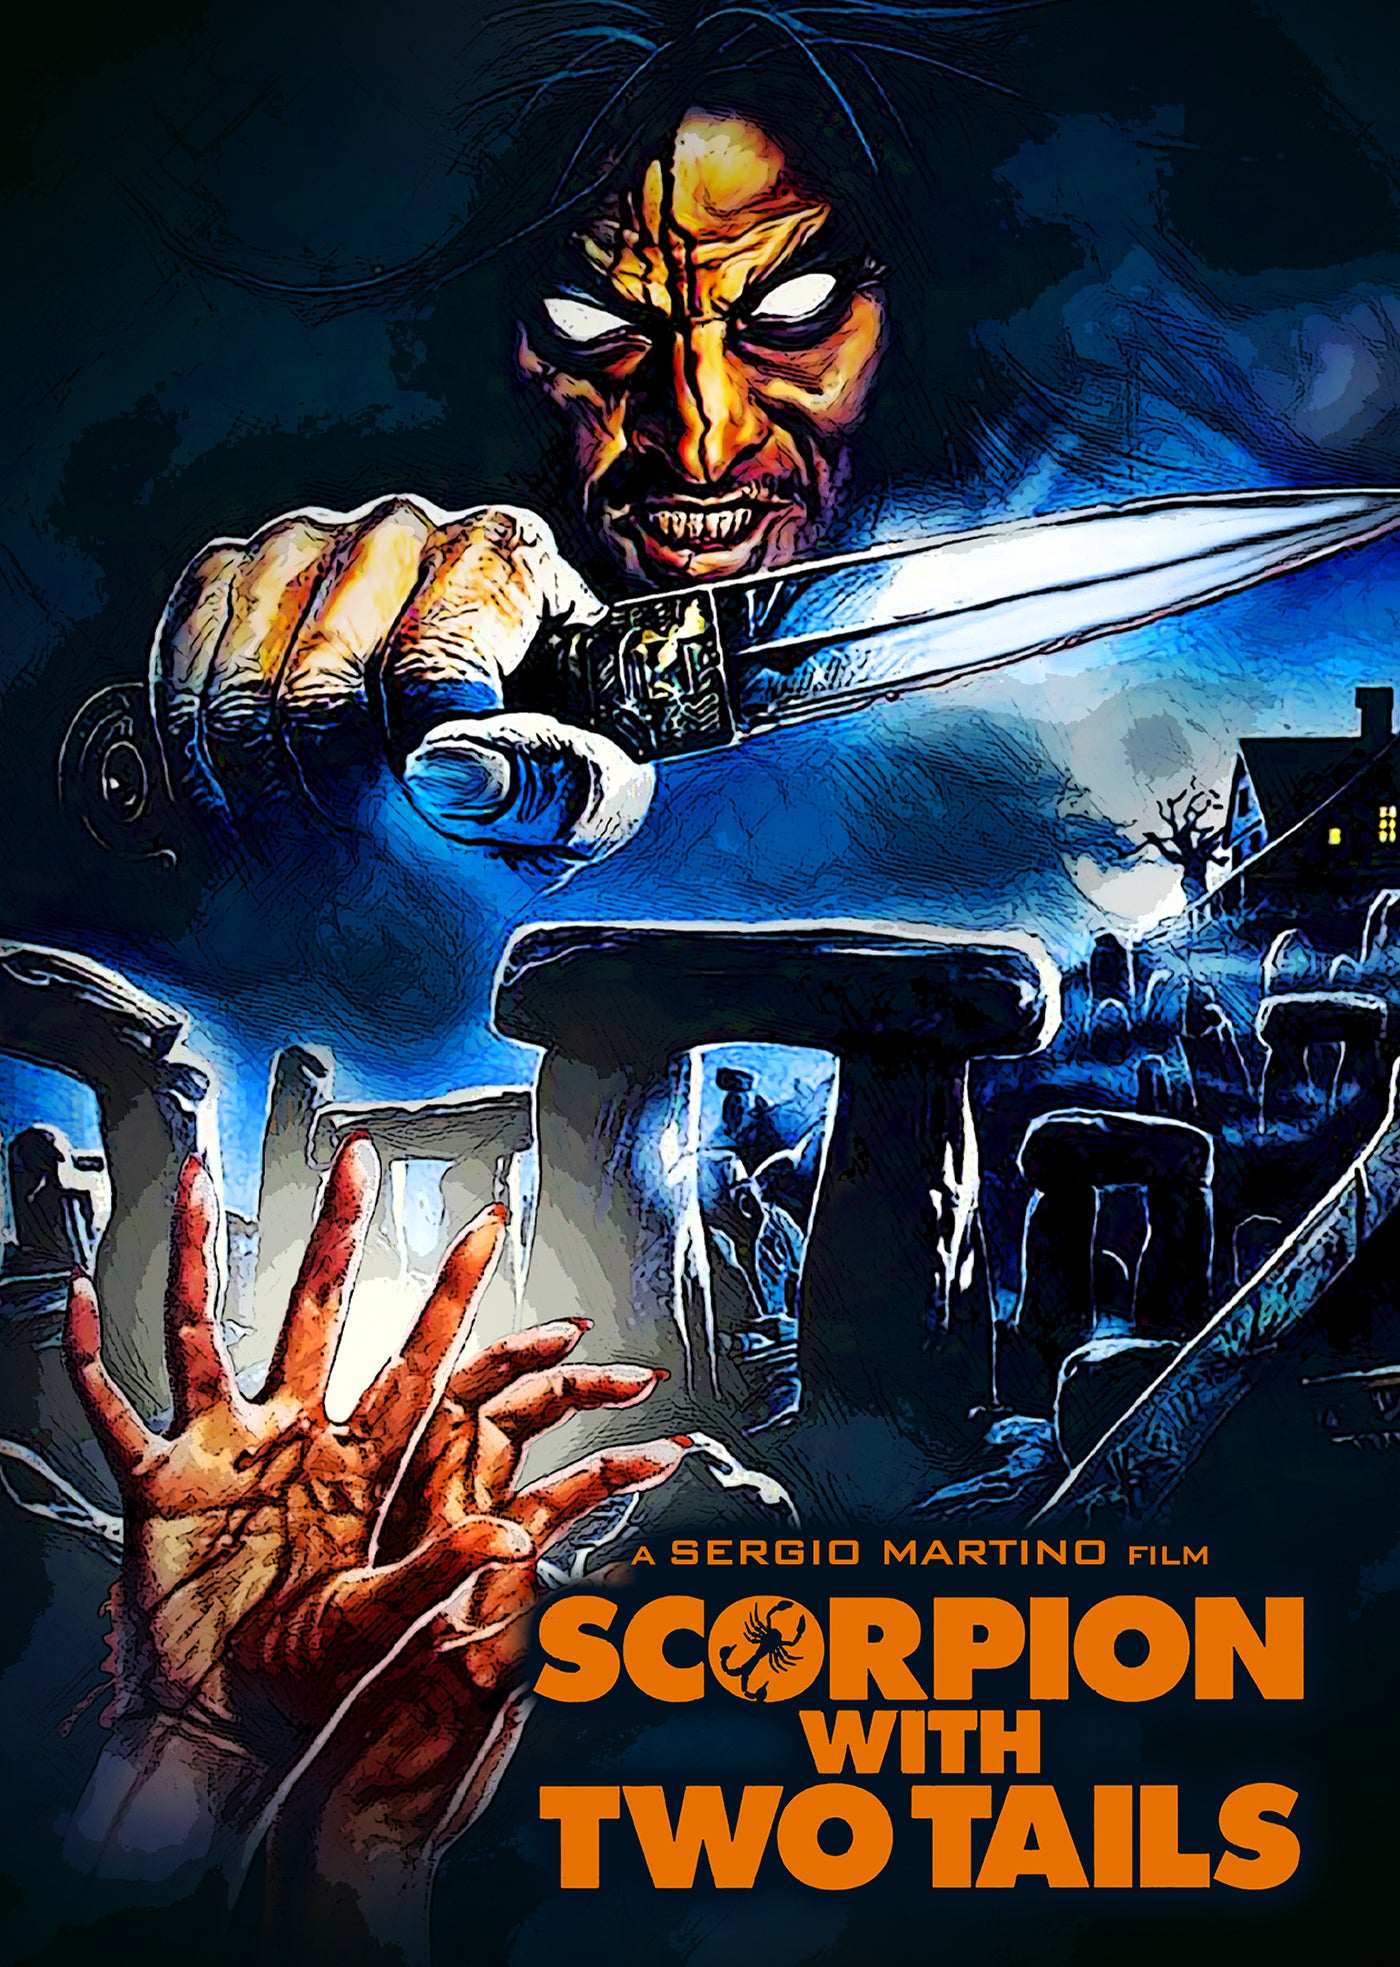 THE SCORPION WITH TWO TAILS DVD